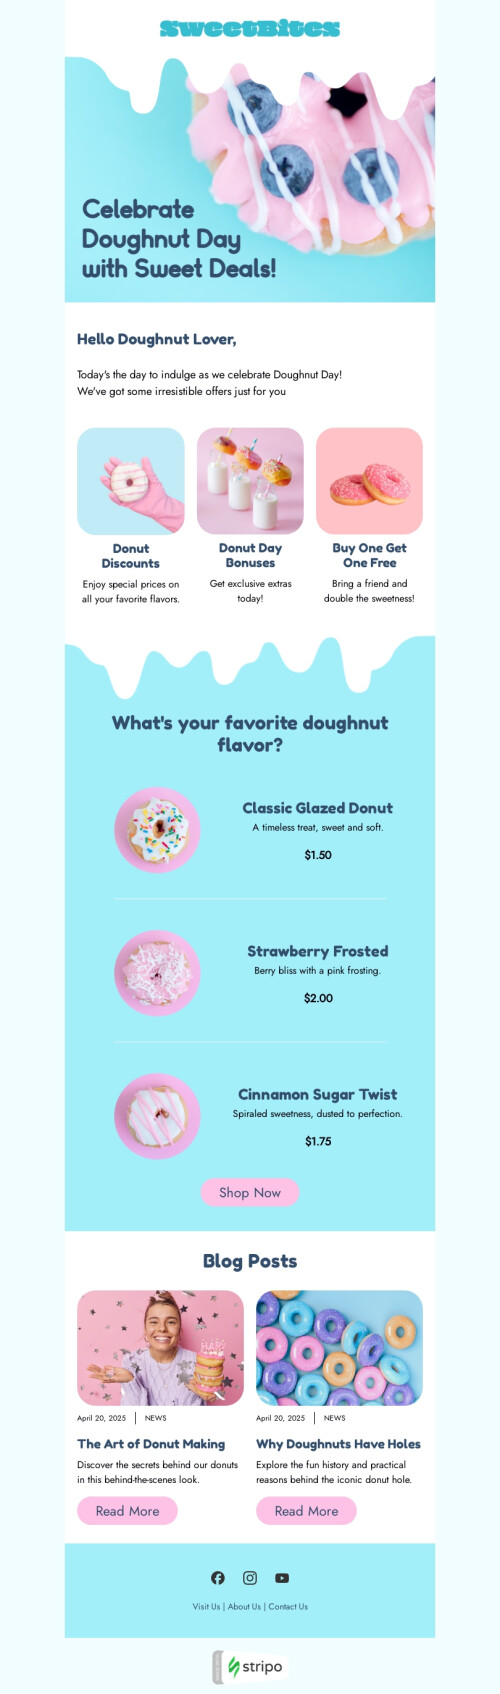 National Doughnut Day email template "Sweet deals" for food industry desktop view